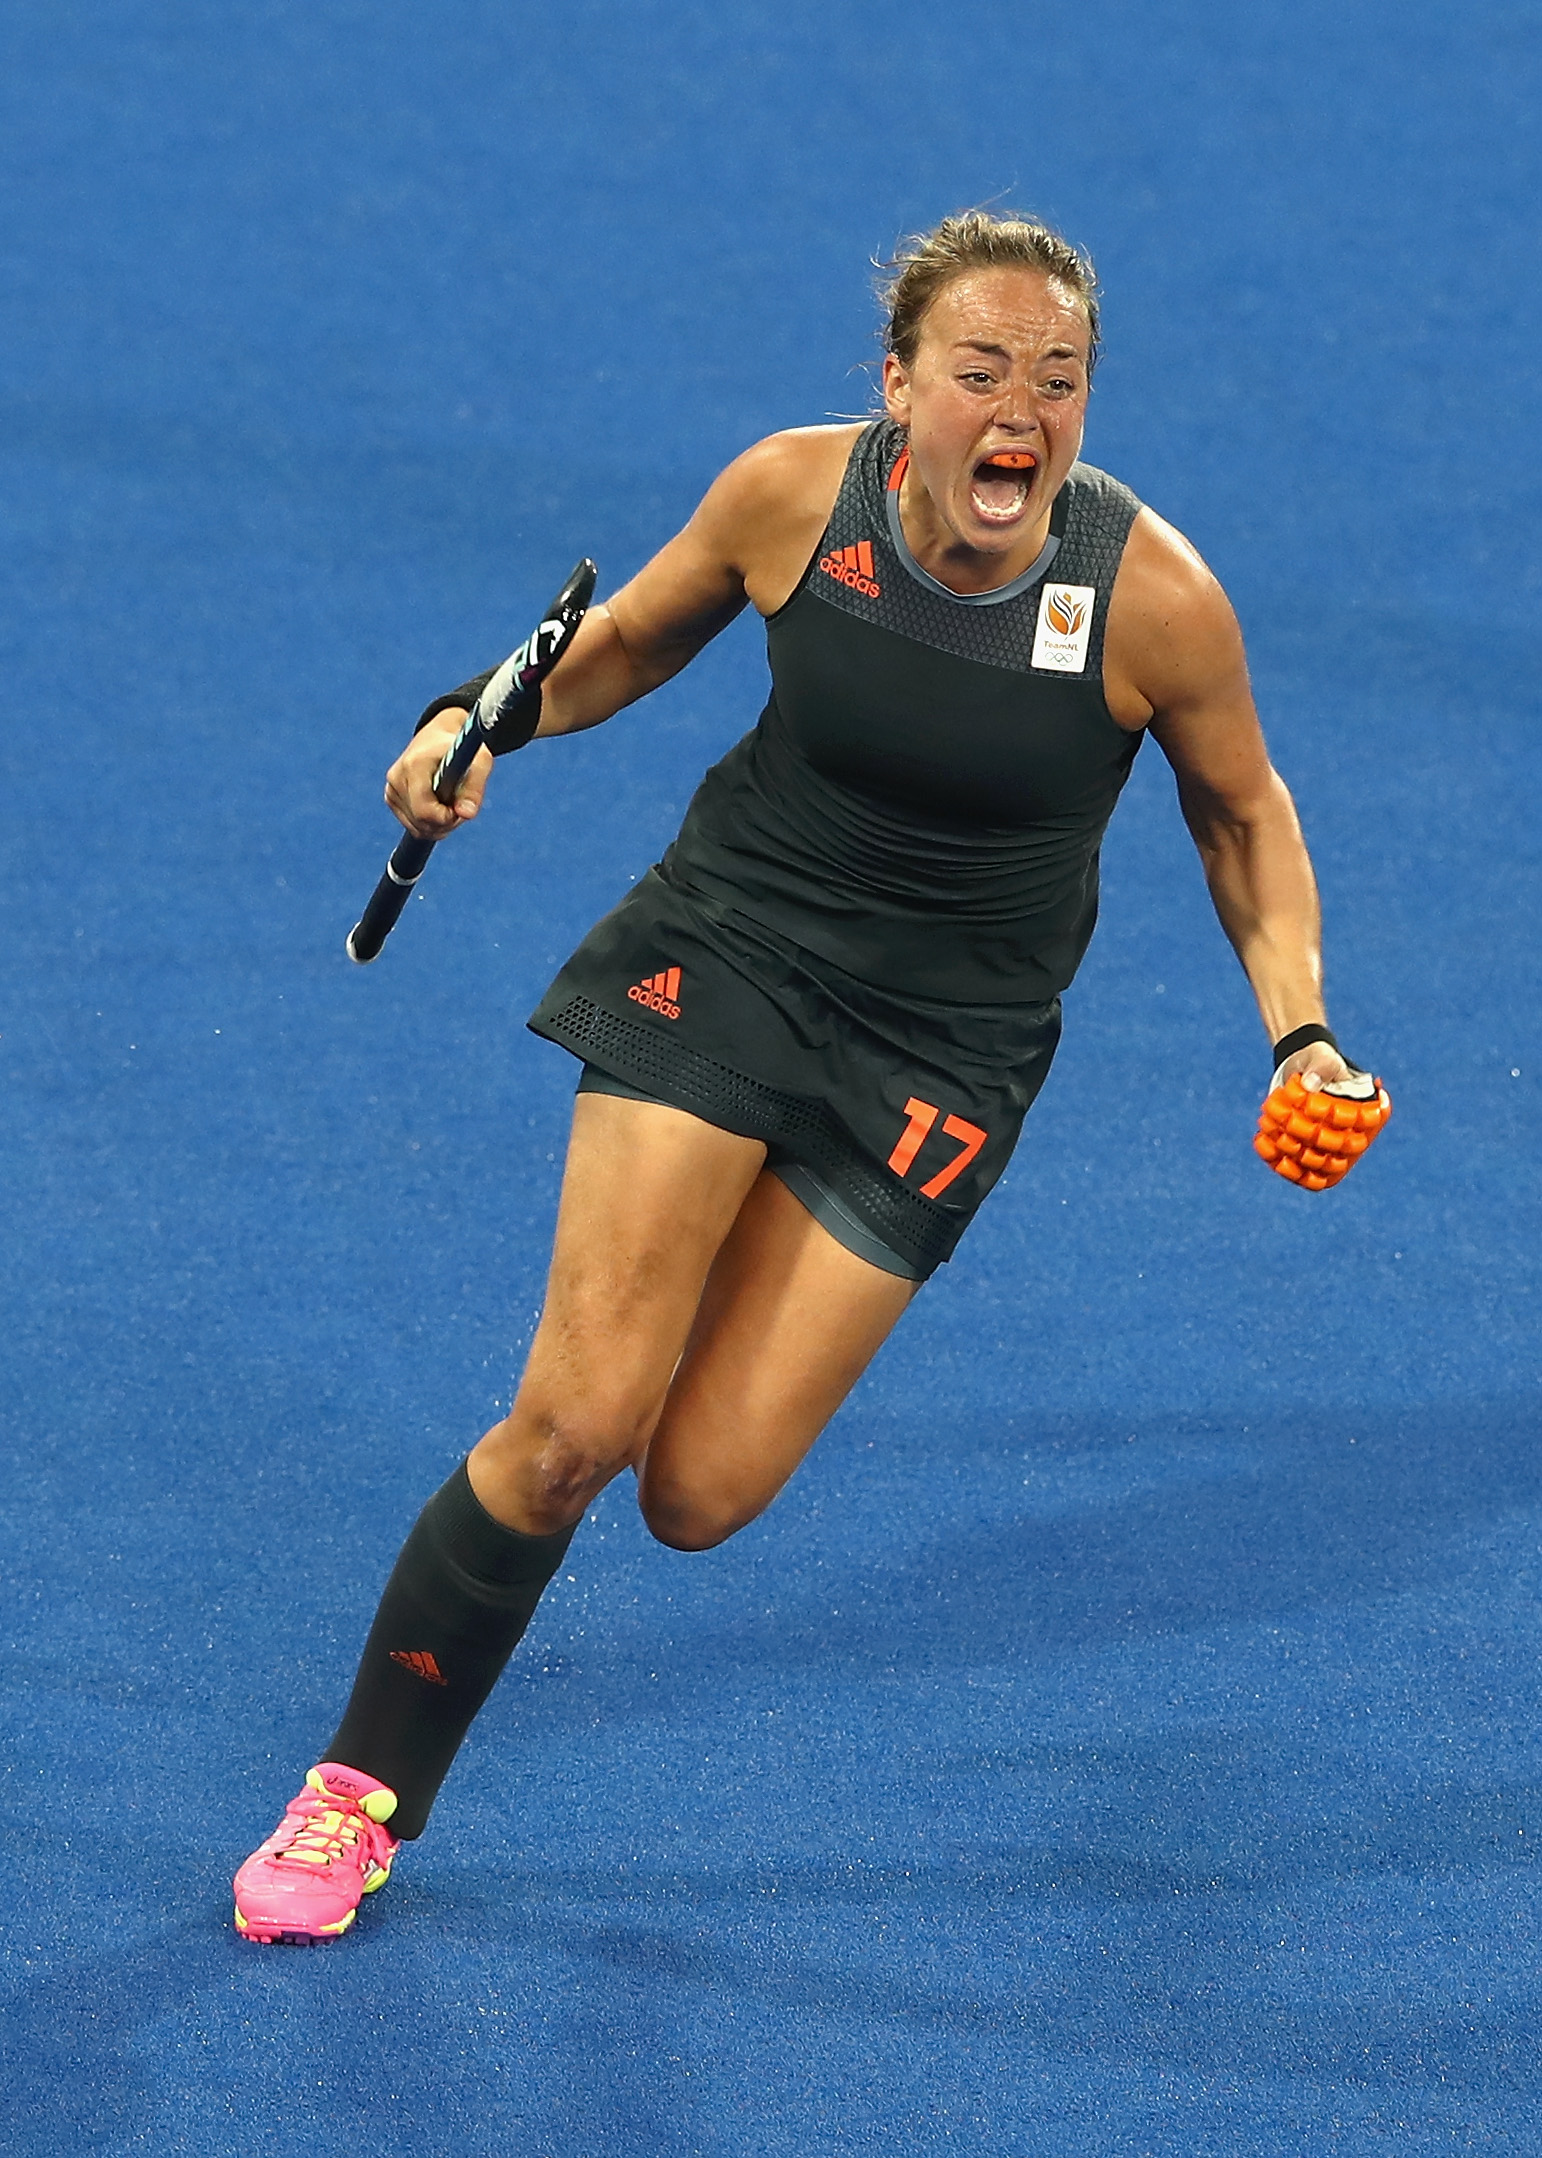 RIO DE JANEIRO, BRAZIL - AUGUST 19: Maartje Paumen of Netherlands celebrates scoring her sides third goal during the Women's Gold Medal Match against the Netherlands on Day 14 of the Rio 2016 Olympic Games at the Olympic Hockey Centre on August 19, 2016 in Rio de Janeiro, Brazil. (Photo by Mark Kolbe/Getty Images)